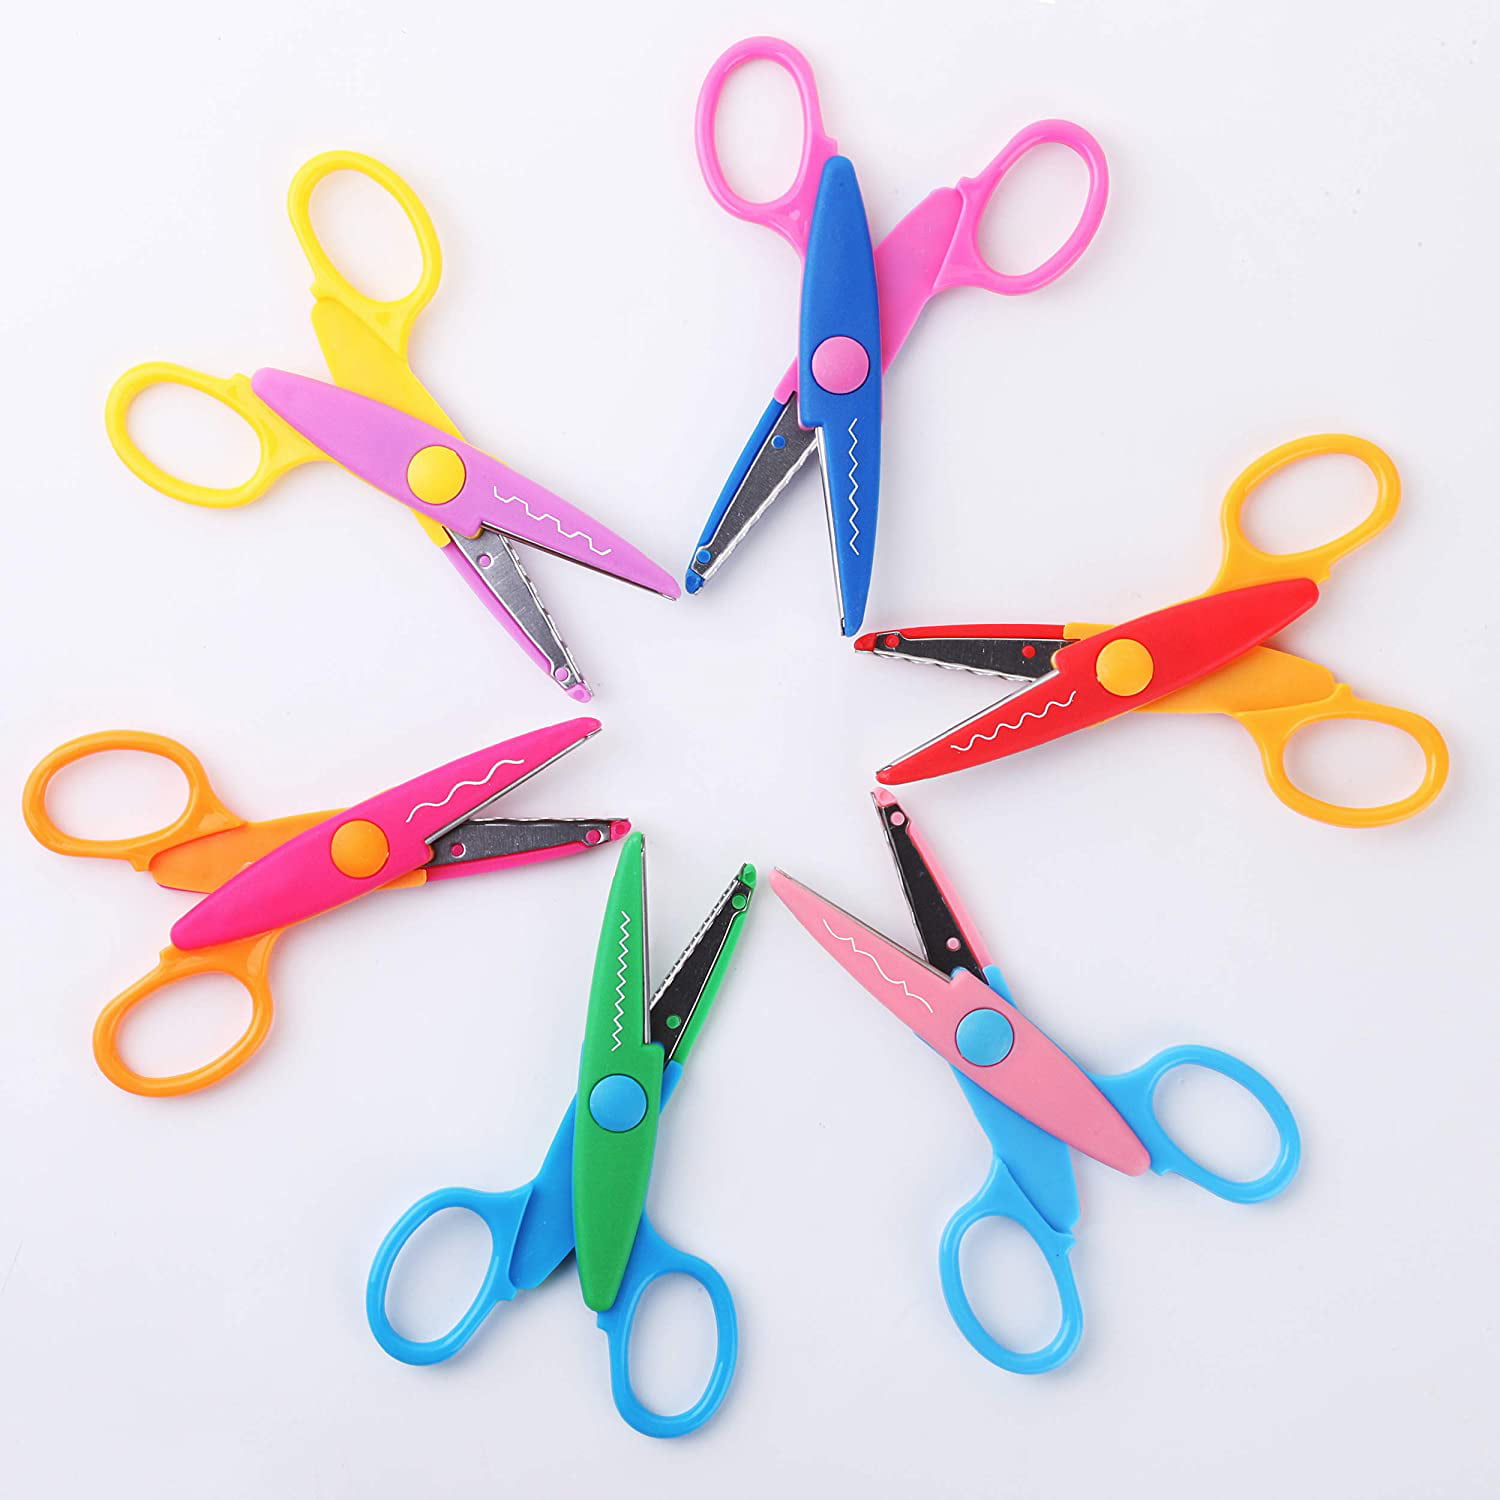 NOGIS Craft Scissors Decorative Edge, ABS Resin Scrapbook Scissors with 6  Pattern, Safe for Kids, Smoothly Cutting, Set of 6, Funny&Colorful 